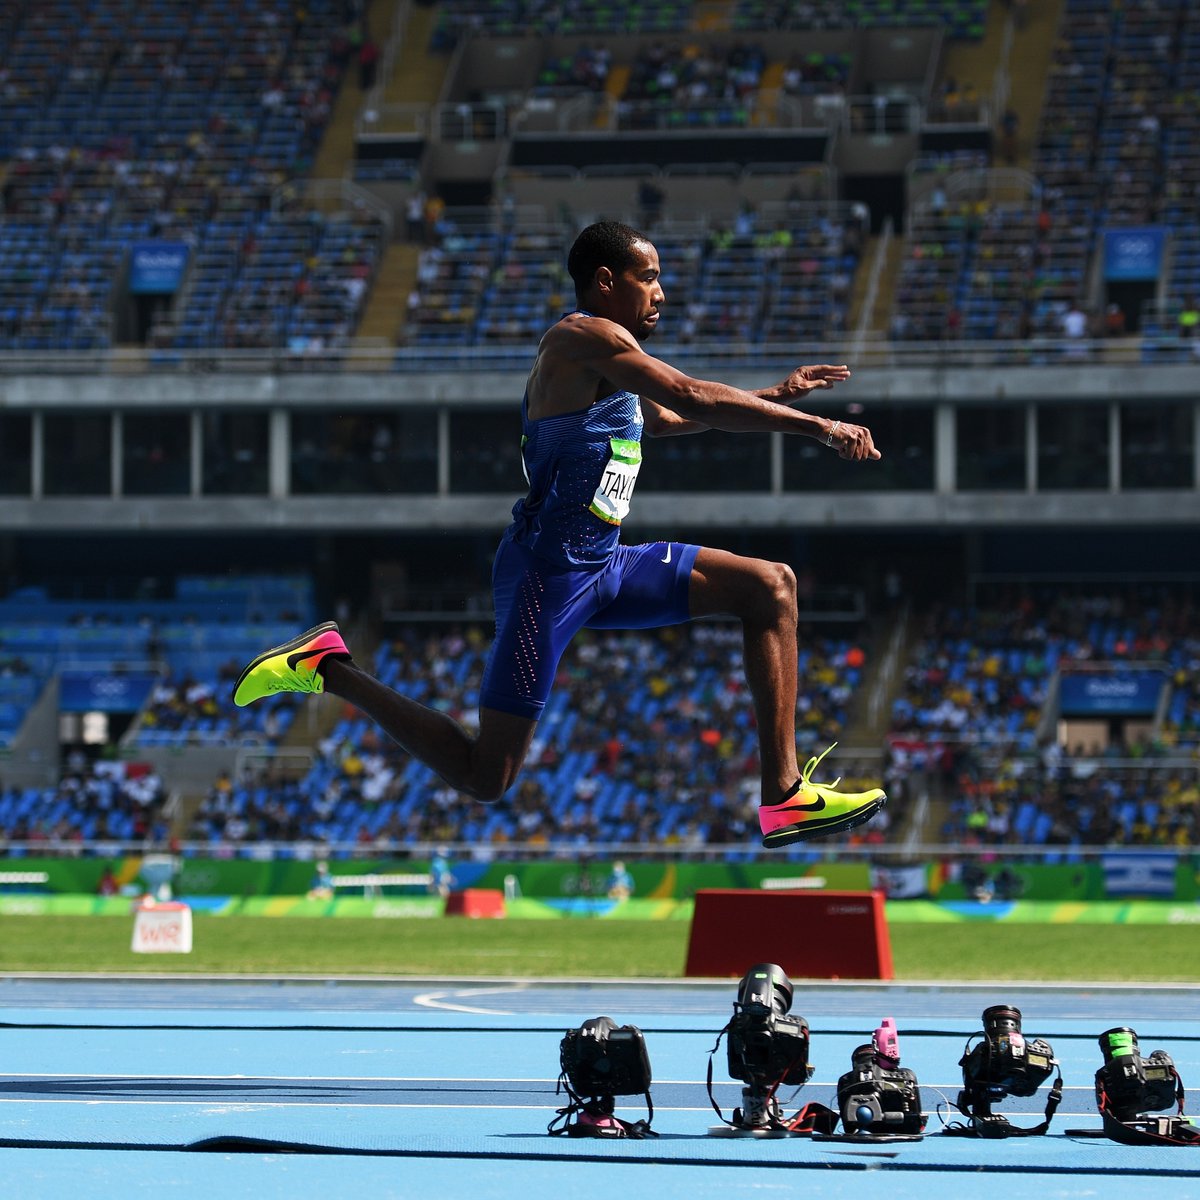 One Word Go Reigning Triple Jump World Champion And Rio 2016 Gold Medallist Christian Taylor